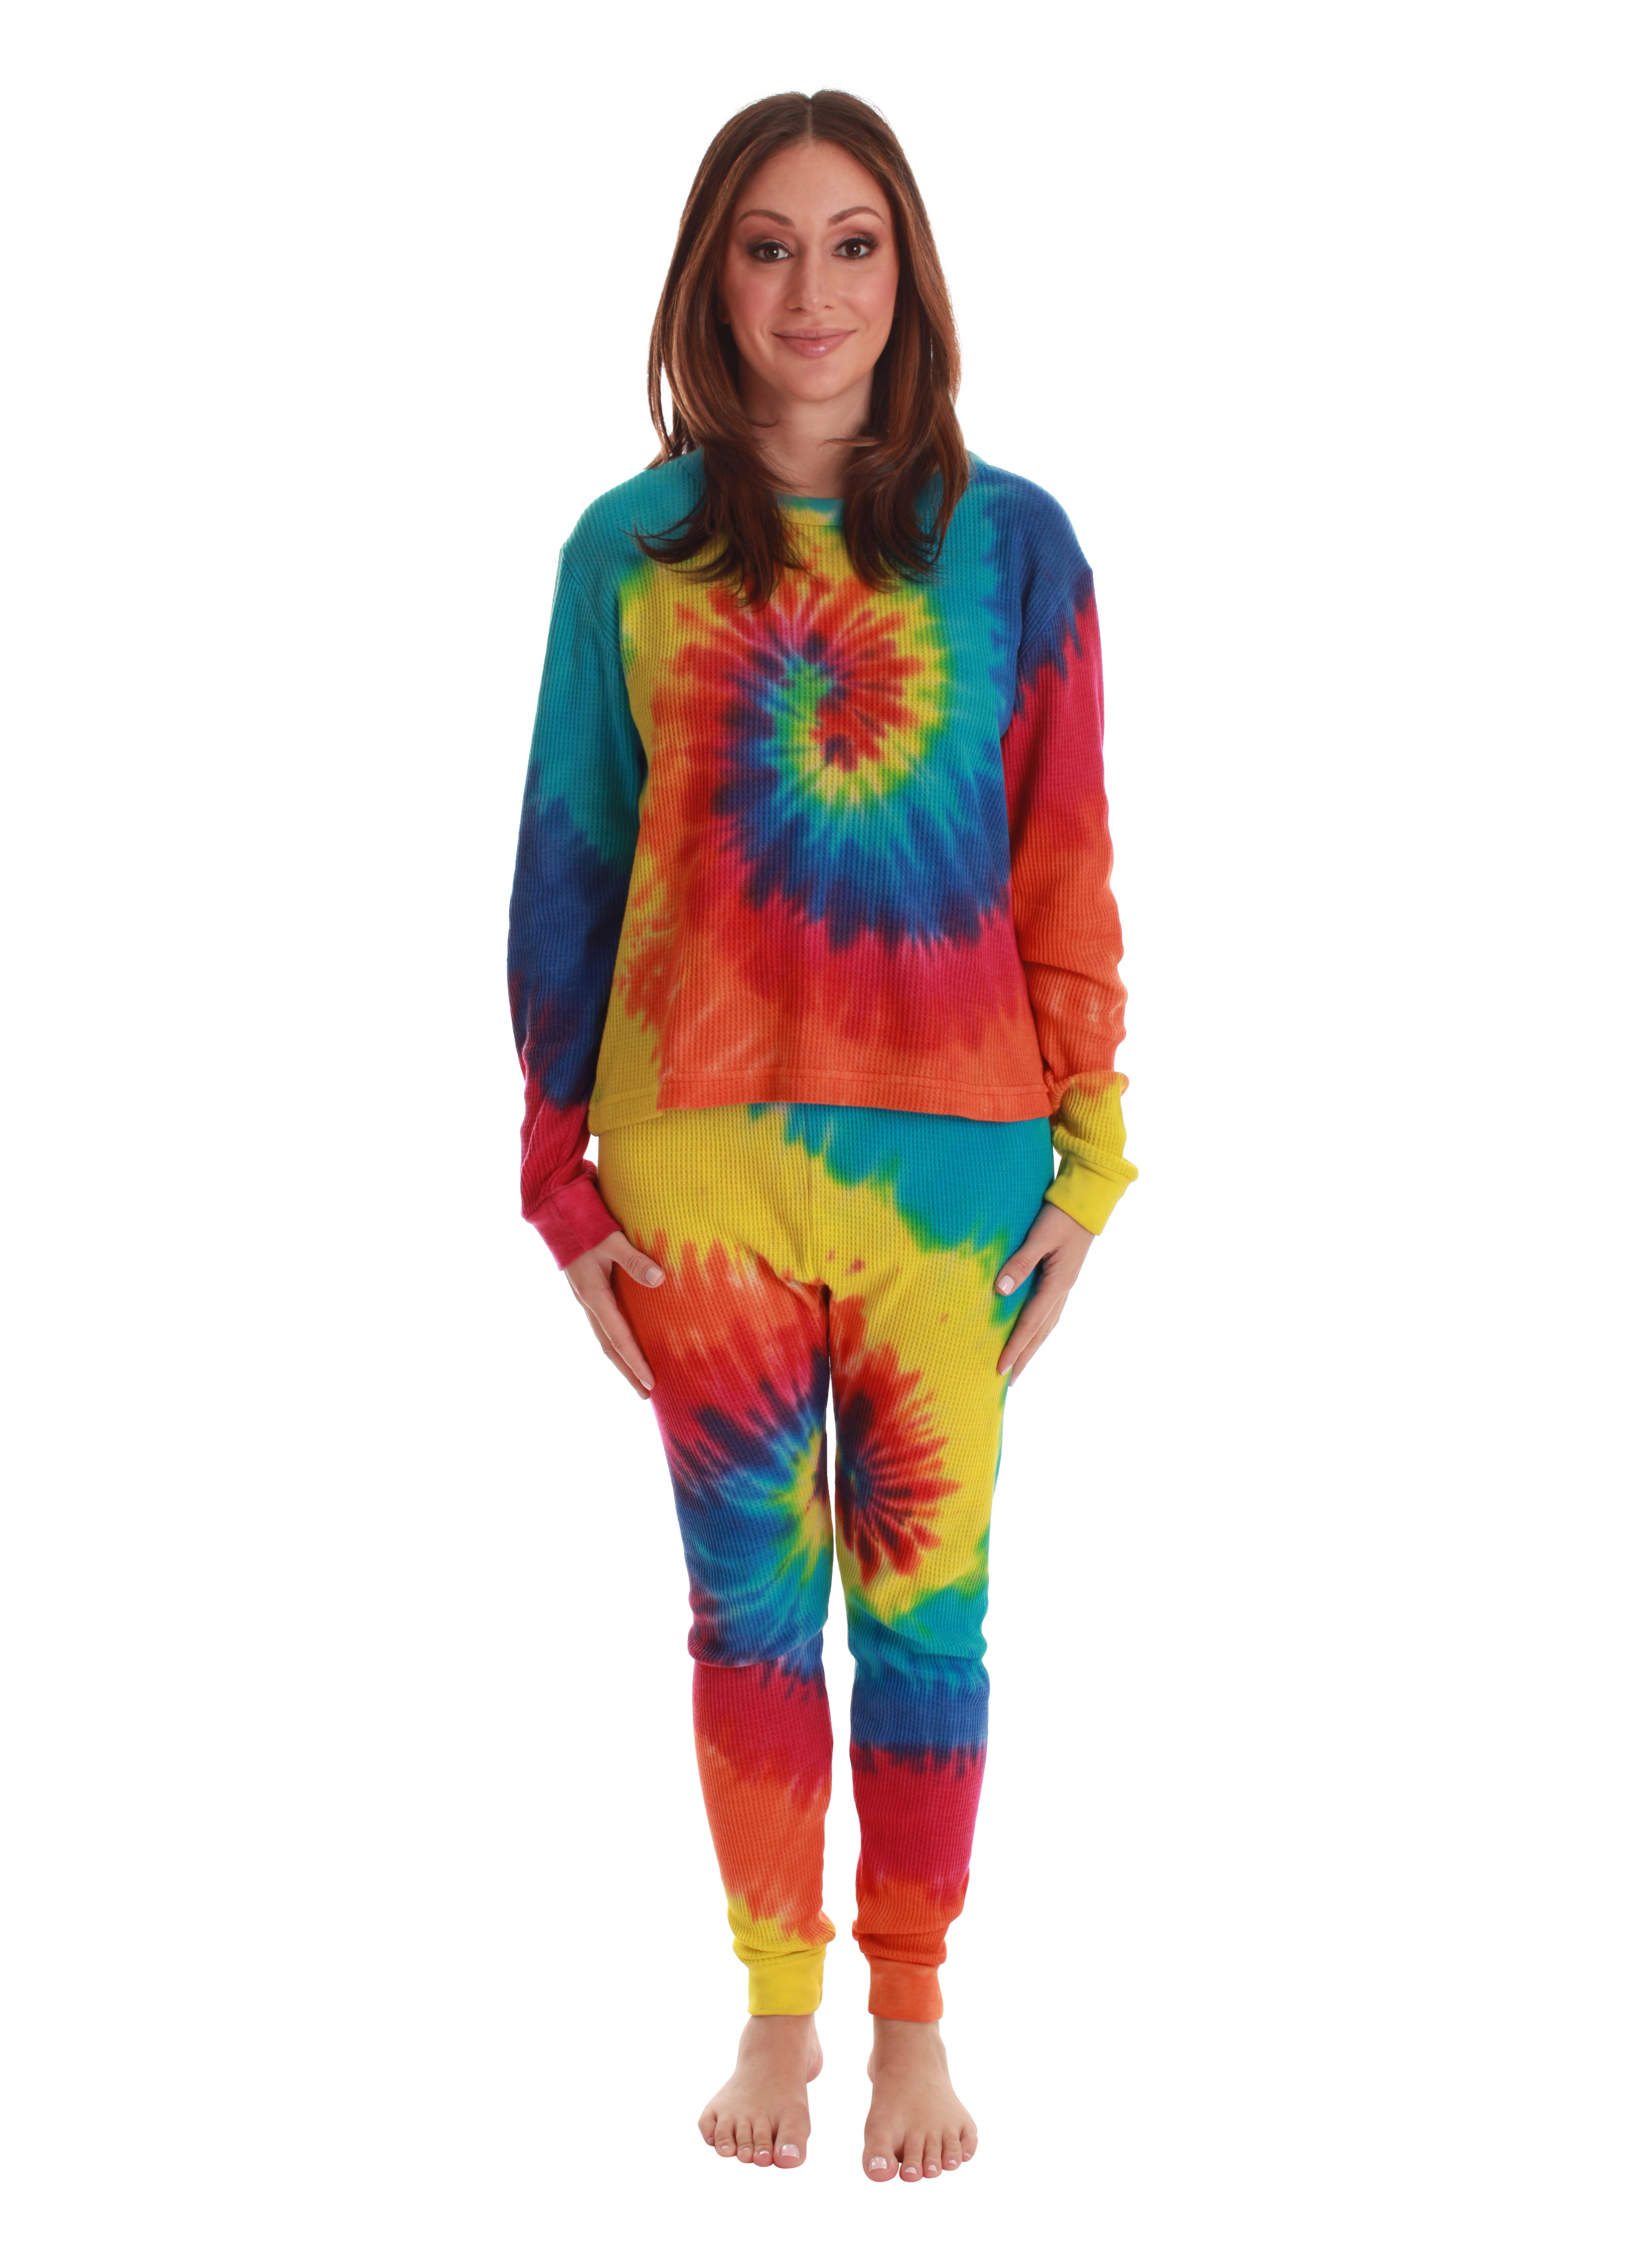 Just Love Tie Dye Mommy and Me Thermal Sets for Women & Children 